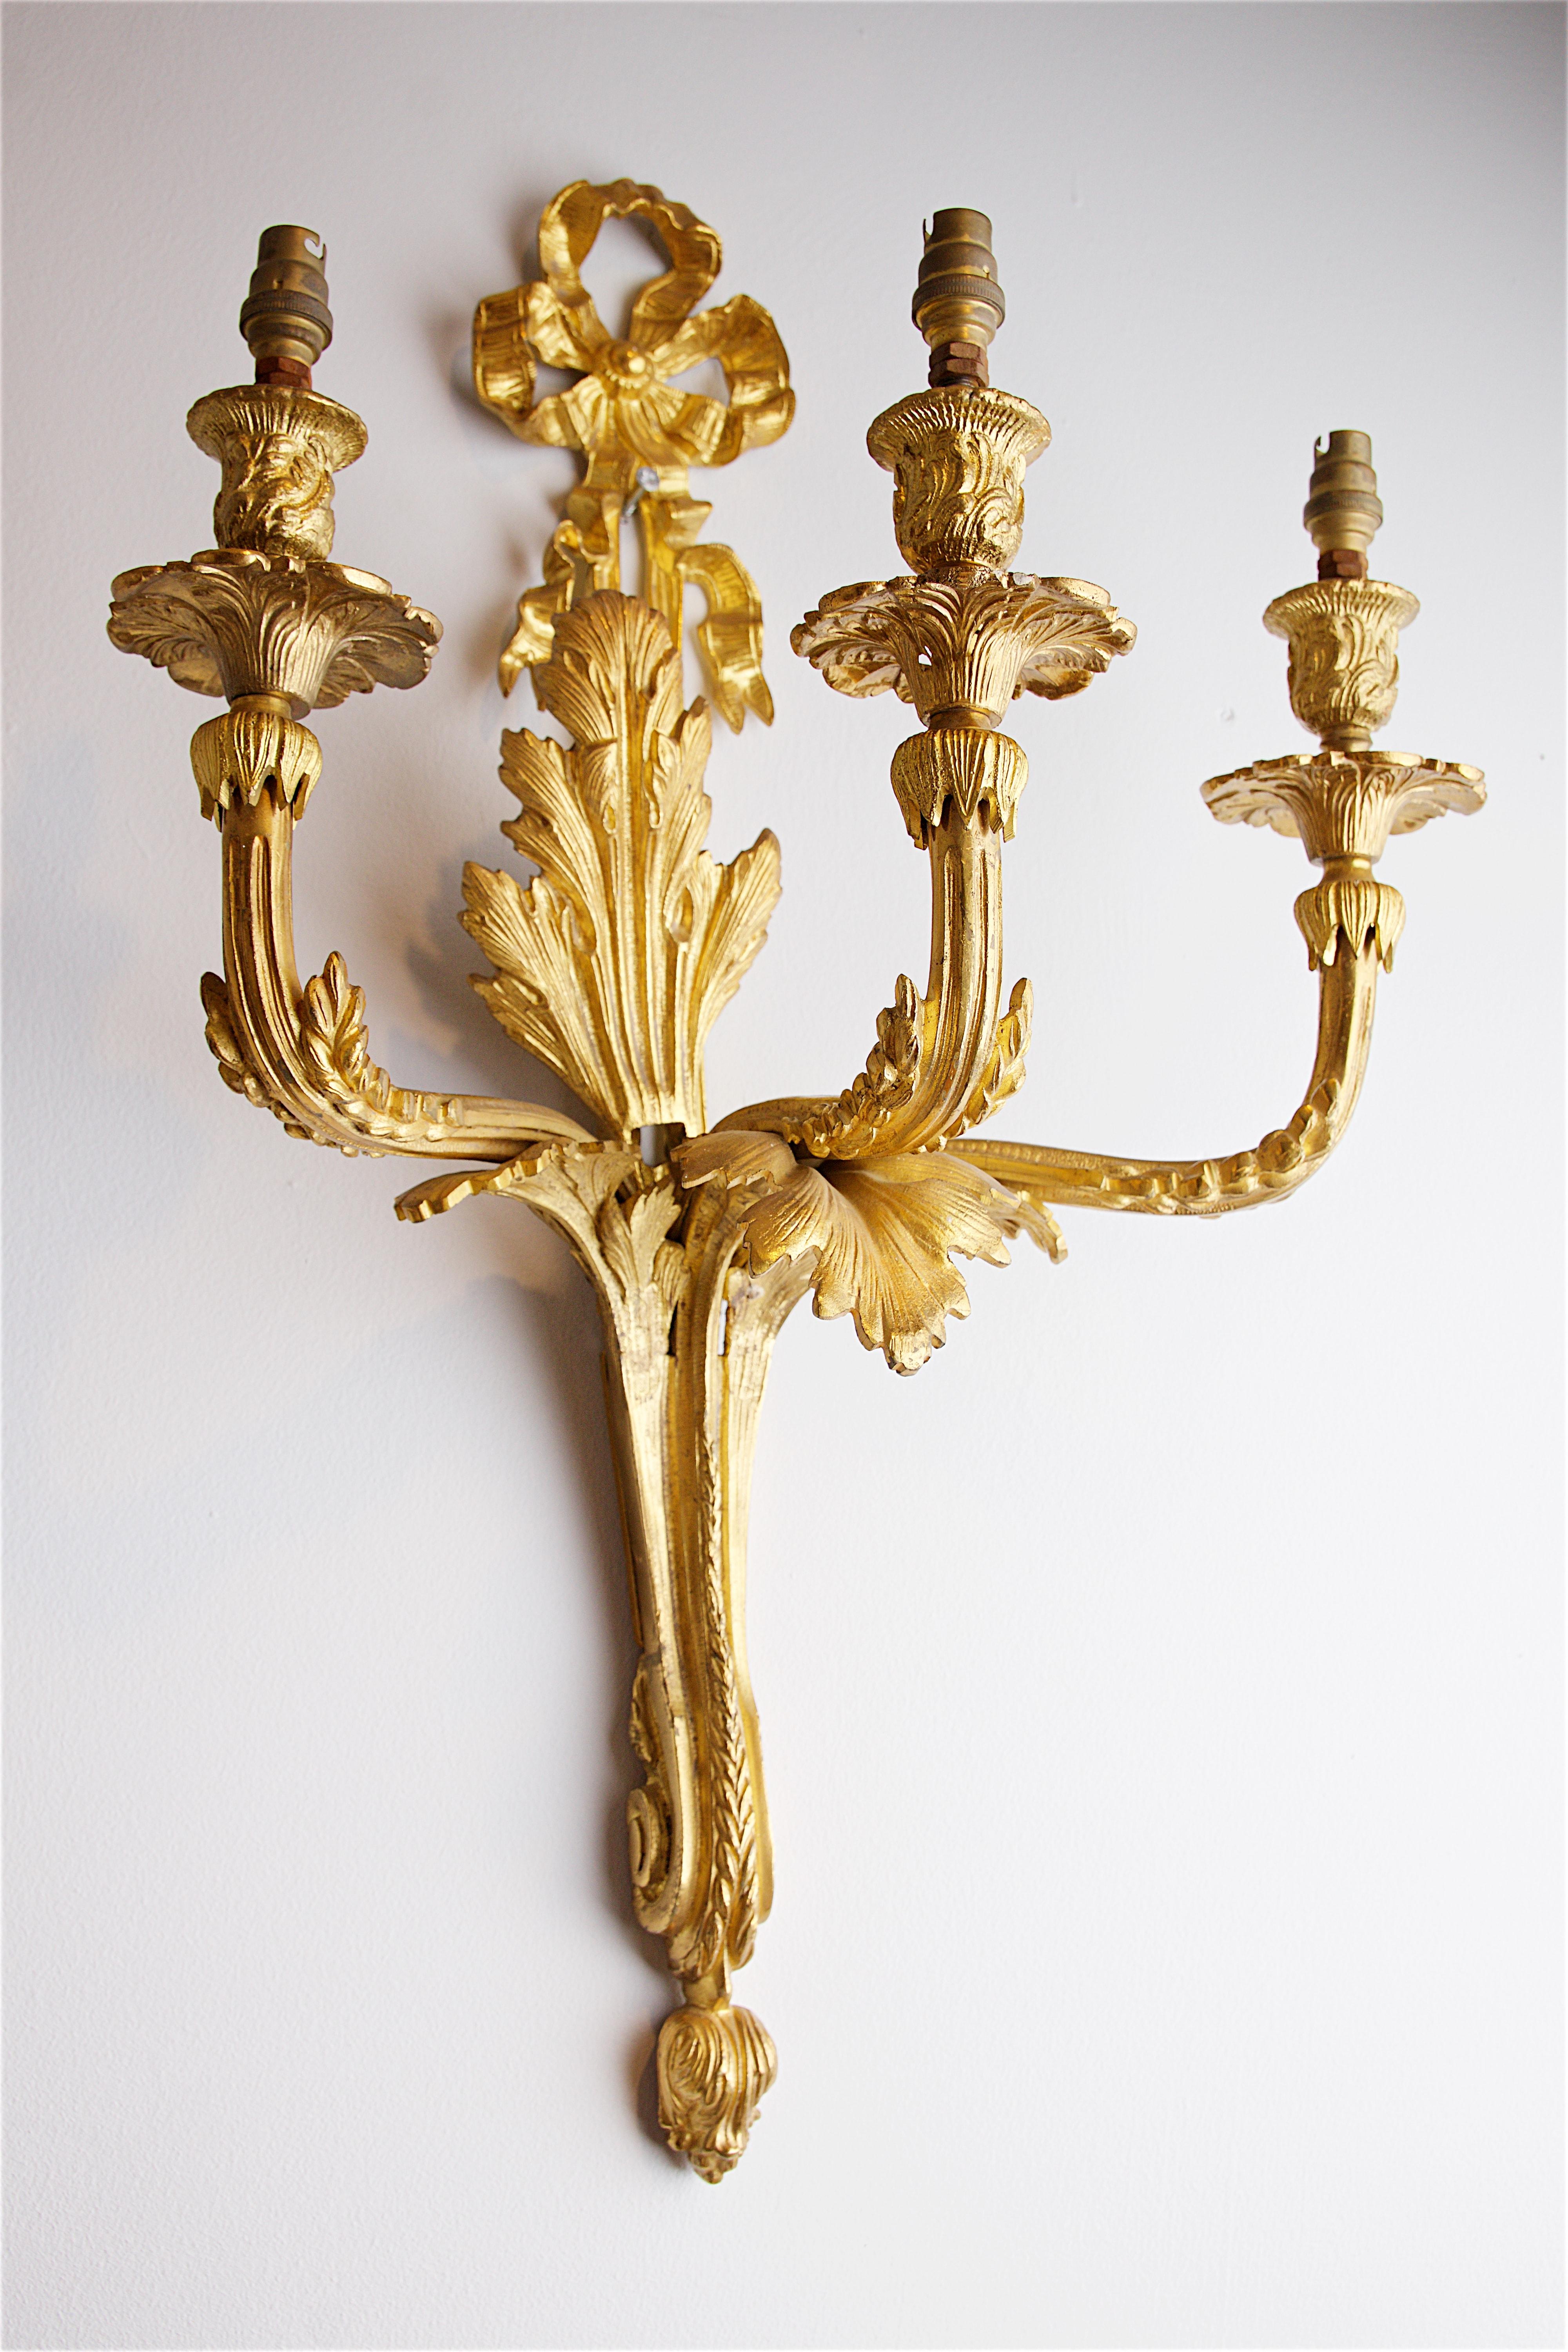 Pair of Mid-20th Century English Ormolu Wall-Mounted Candelabra For Sale 4